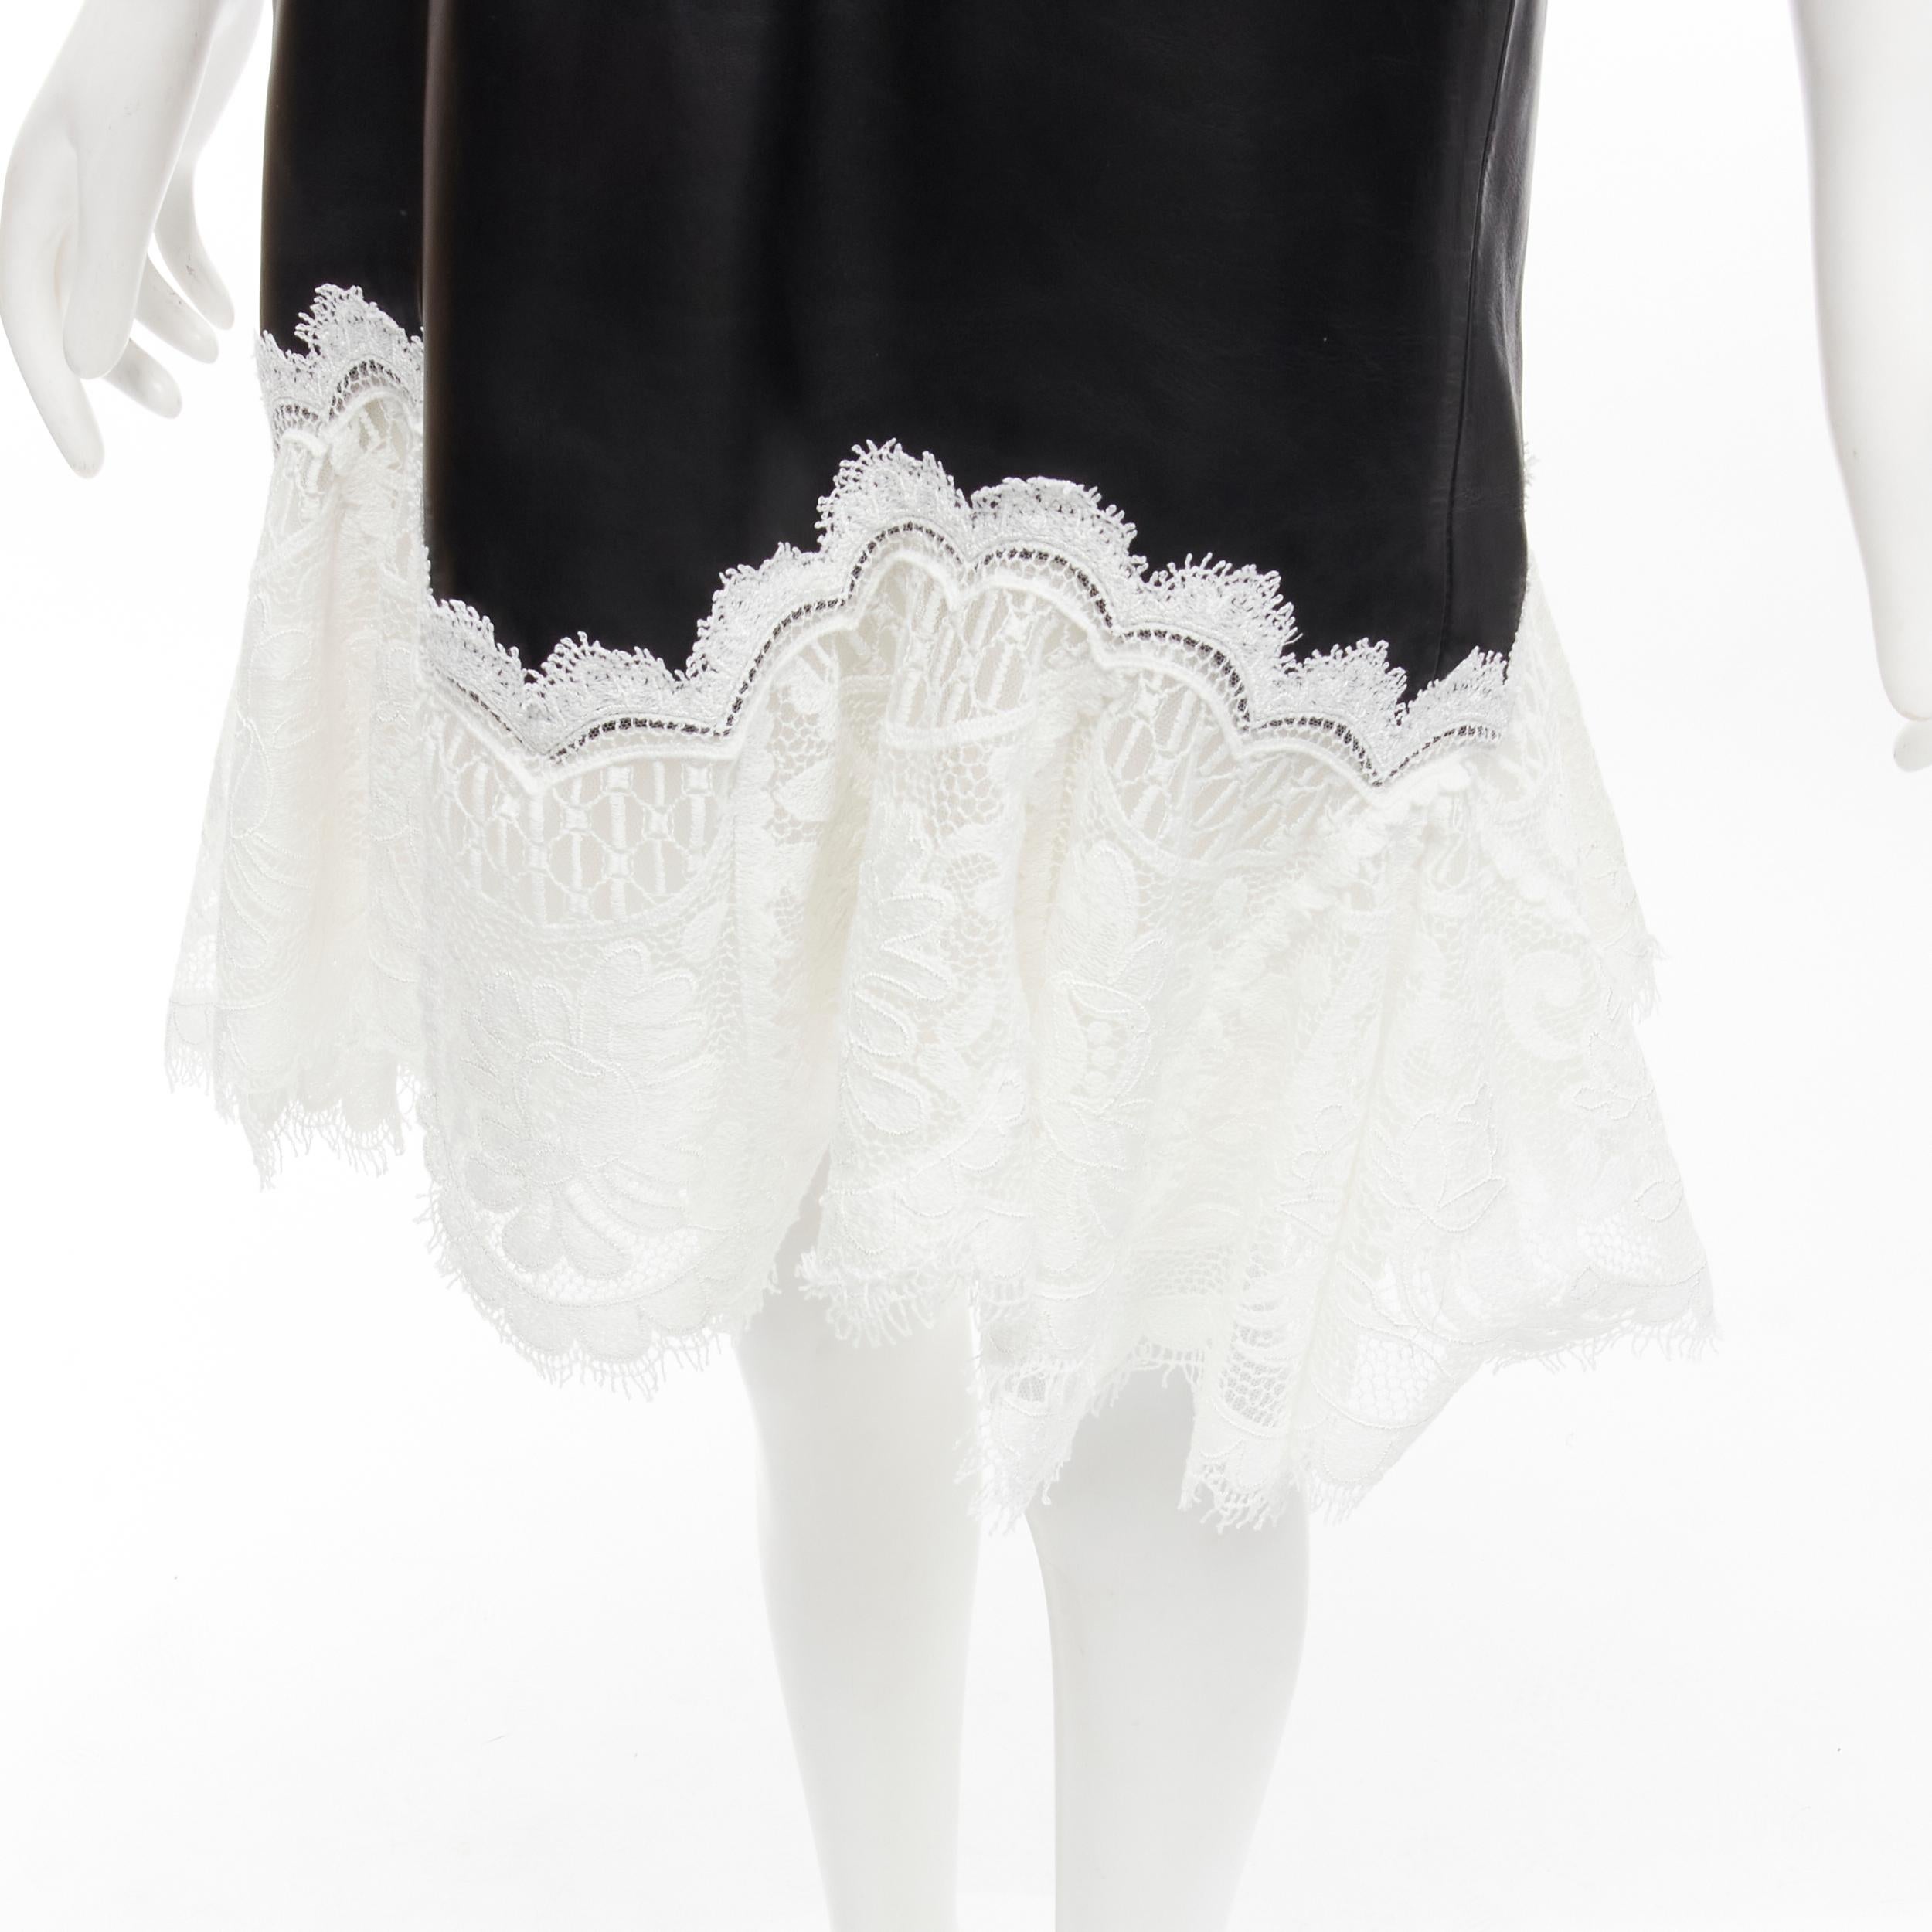 ALEXANDER MCQUEEN 2020 Runway black leather bustier white lace dress IT38 S
Brand: Alexander McQueen
Collection: 2020 
Material: Leather
Color: Black
Pattern: Solid
Closure: Zip
Extra Detail: Structured stiff leather bustier construction. Soft